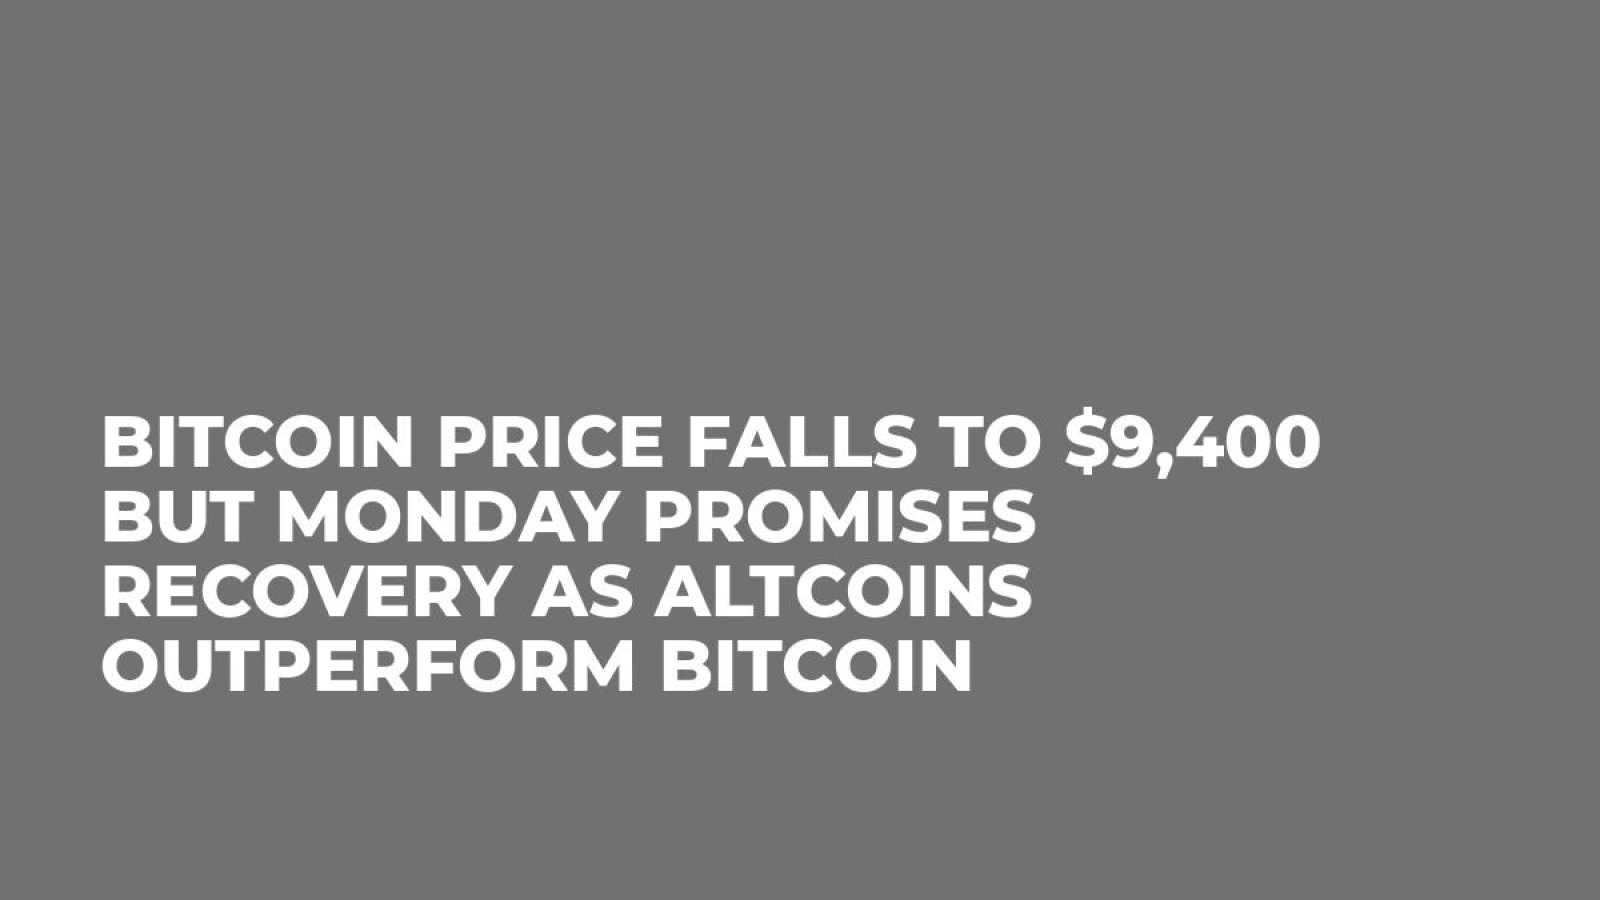 Bitcoin Price Falls to $9,400 But Monday Promises Recovery As Altcoins Outperform Bitcoin